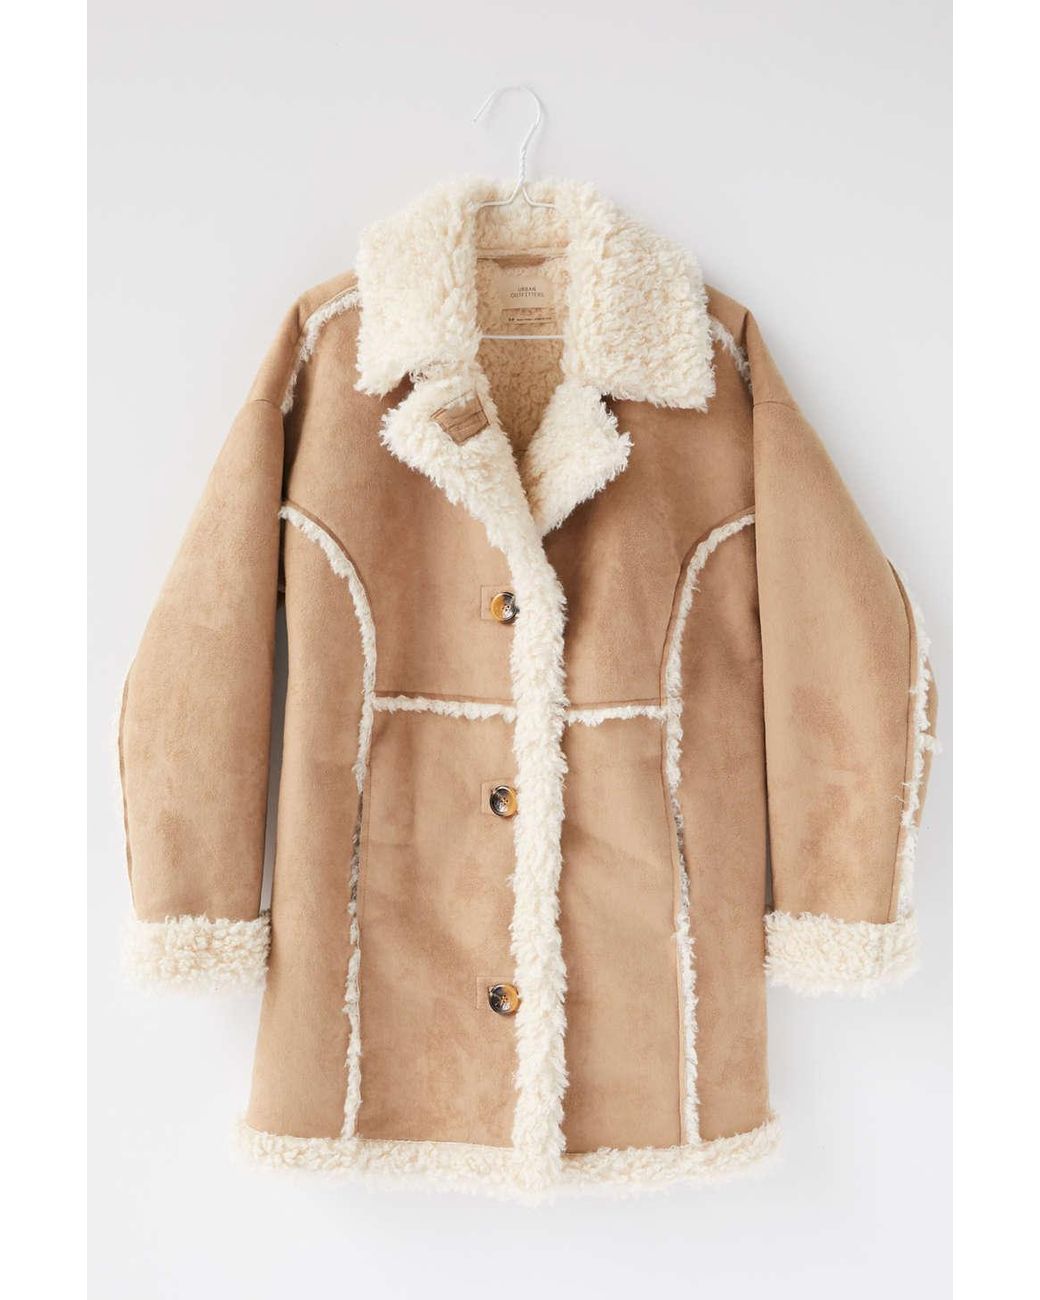 BDG Urban Outfitters Vintage Longline Faux Leather Shearling Aviator Jacket